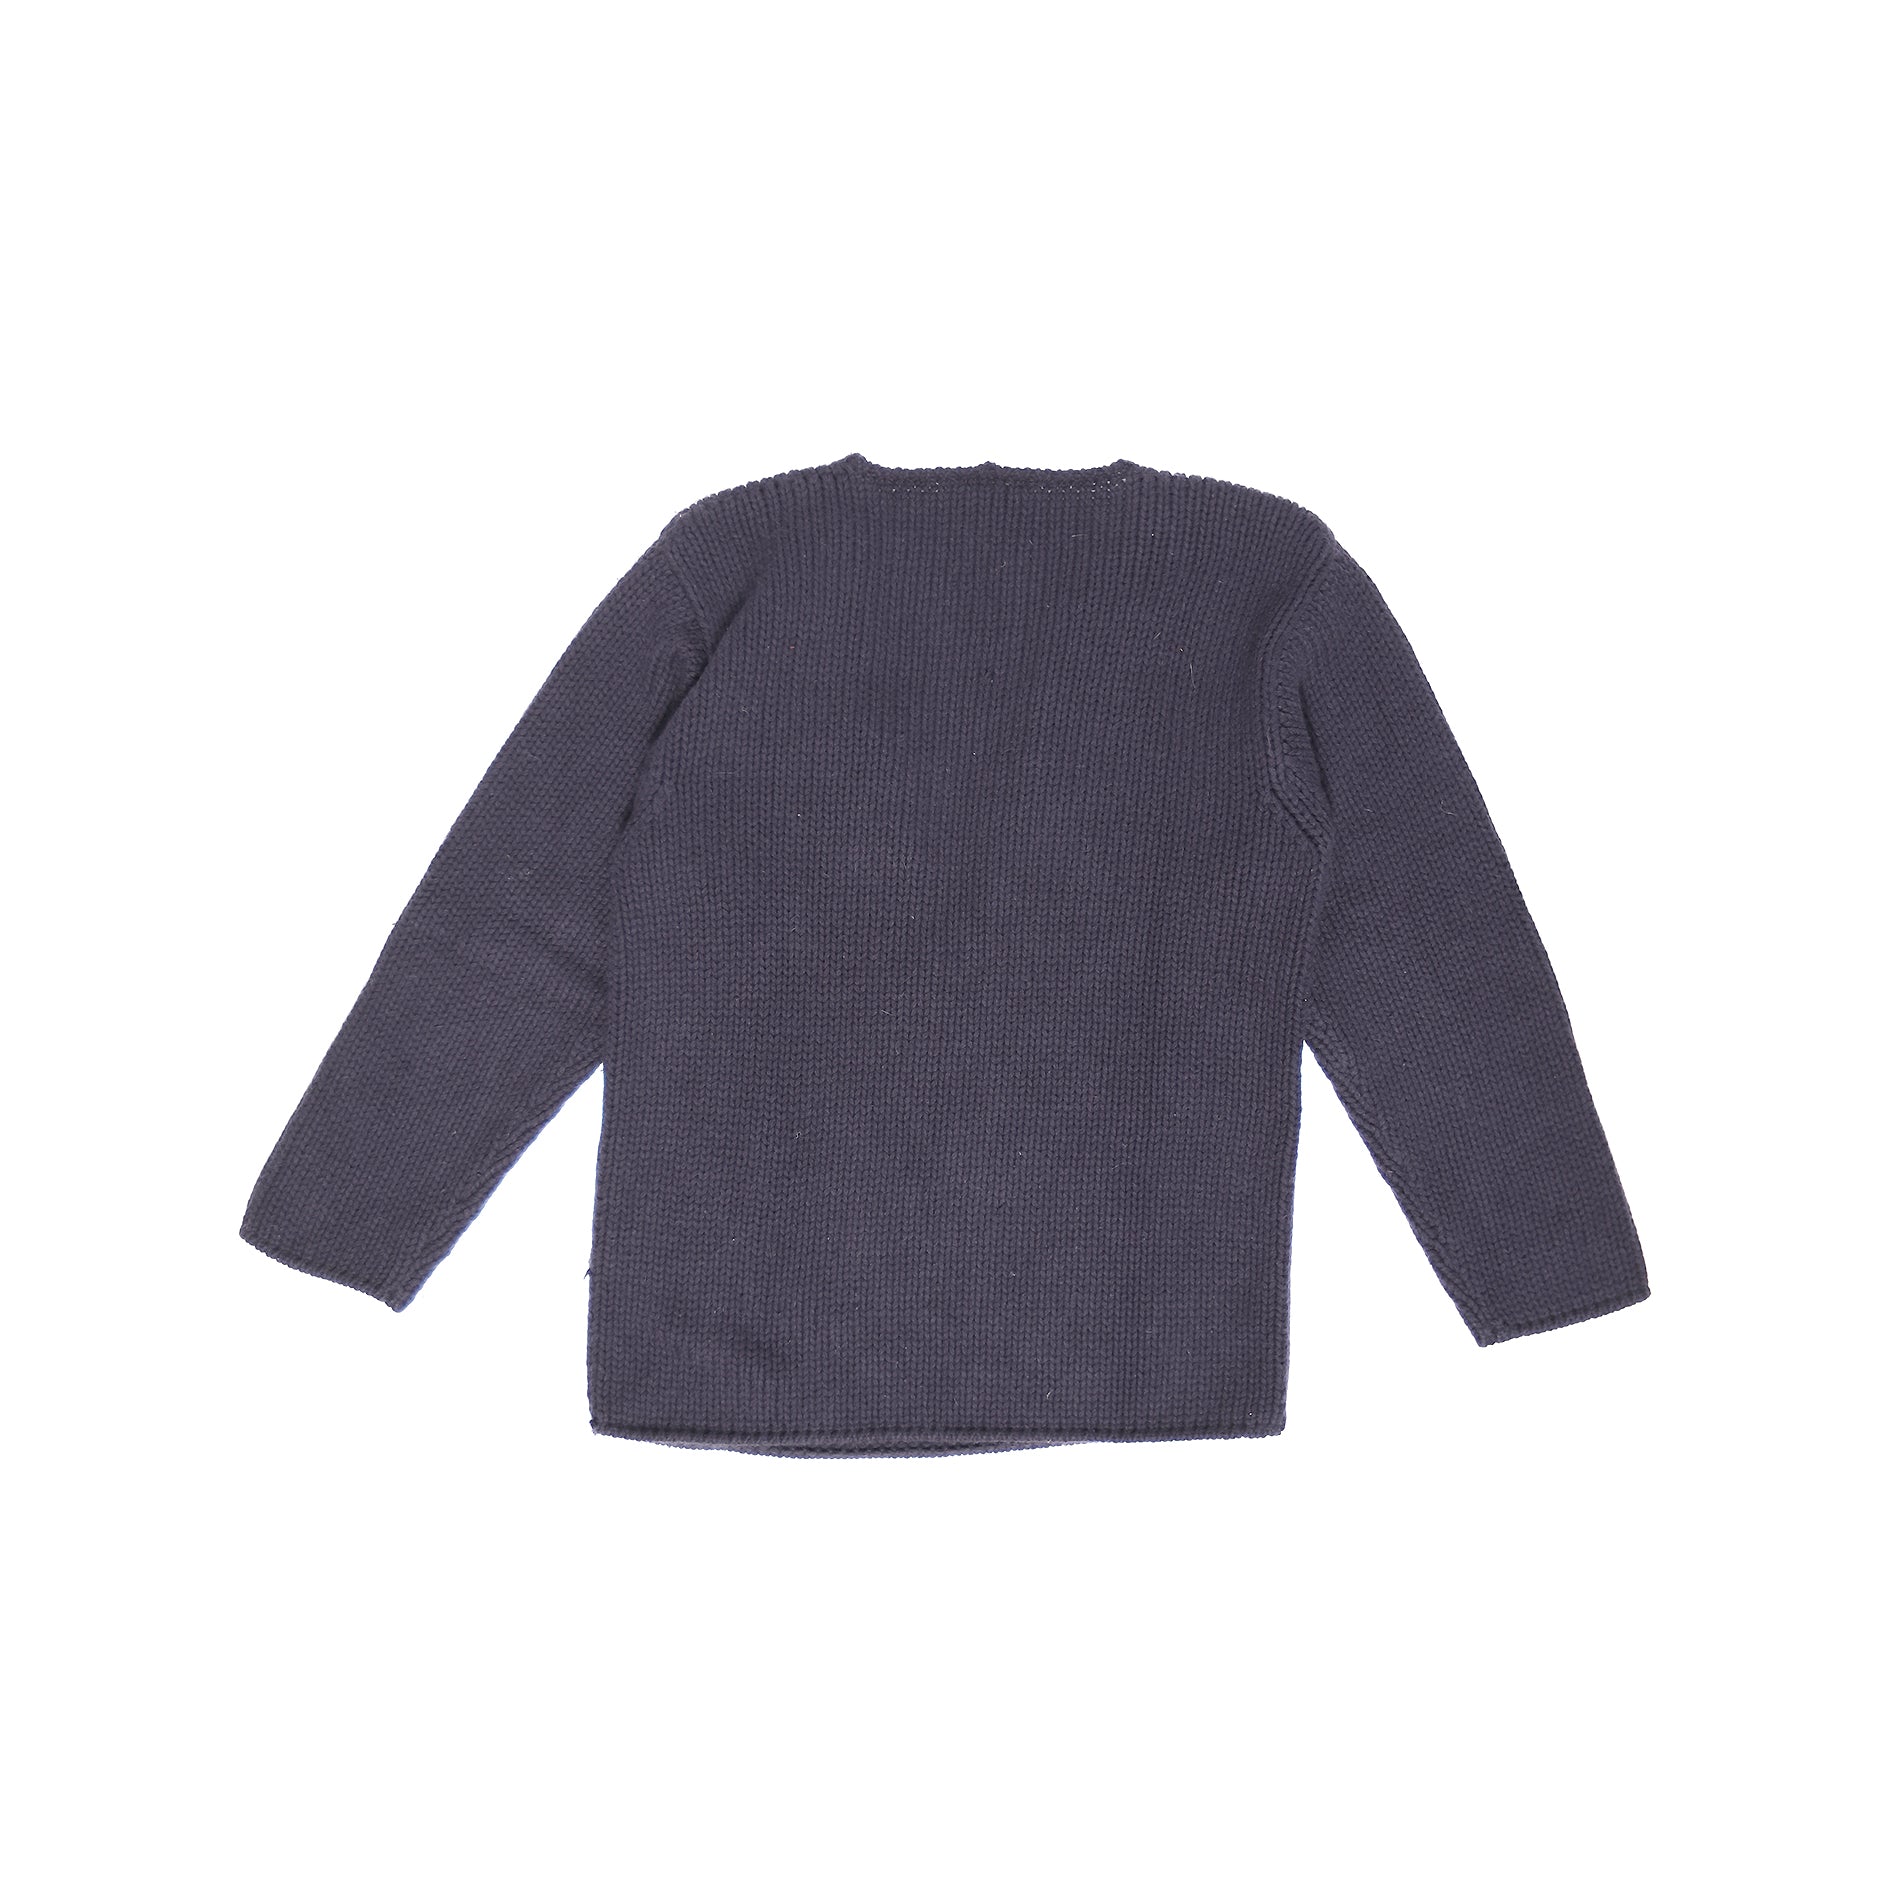 Gucci by Tom Ford V-Neck Cashmere Knit - Ākaibu Store